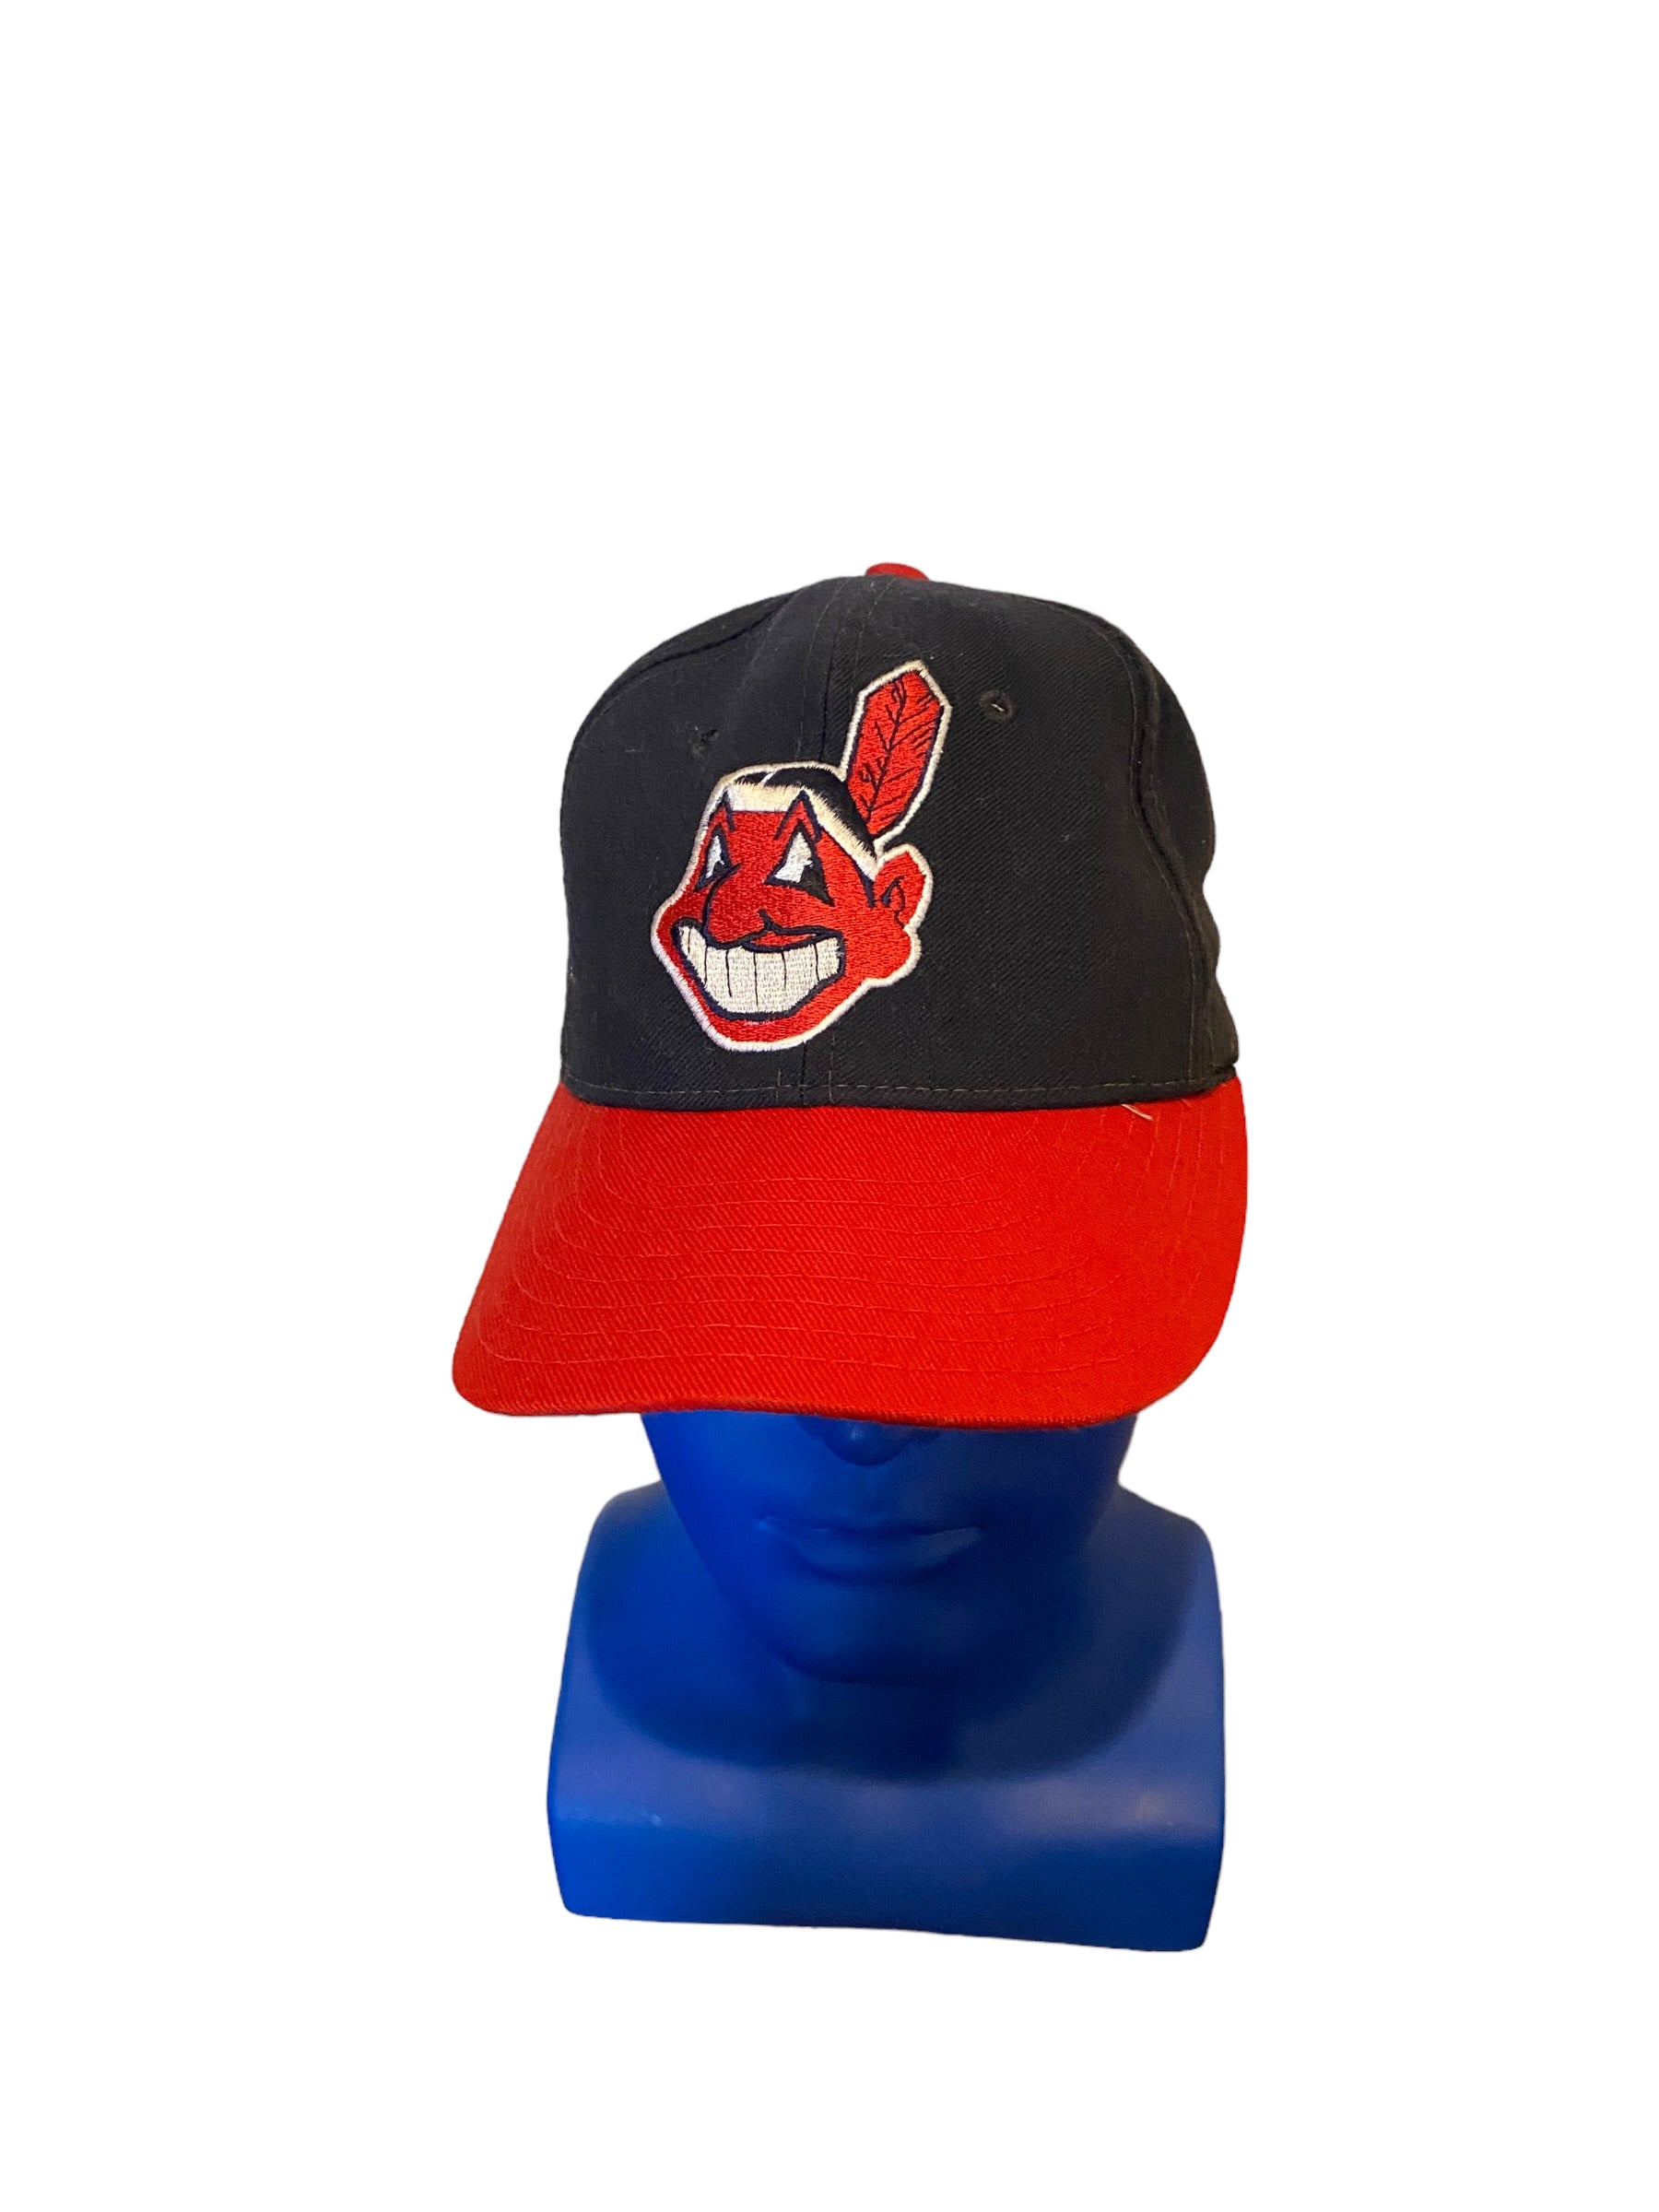 Vintage 90s New Era Cleveland Indians Diamond Collection Fitted Hat Size 7 1/8